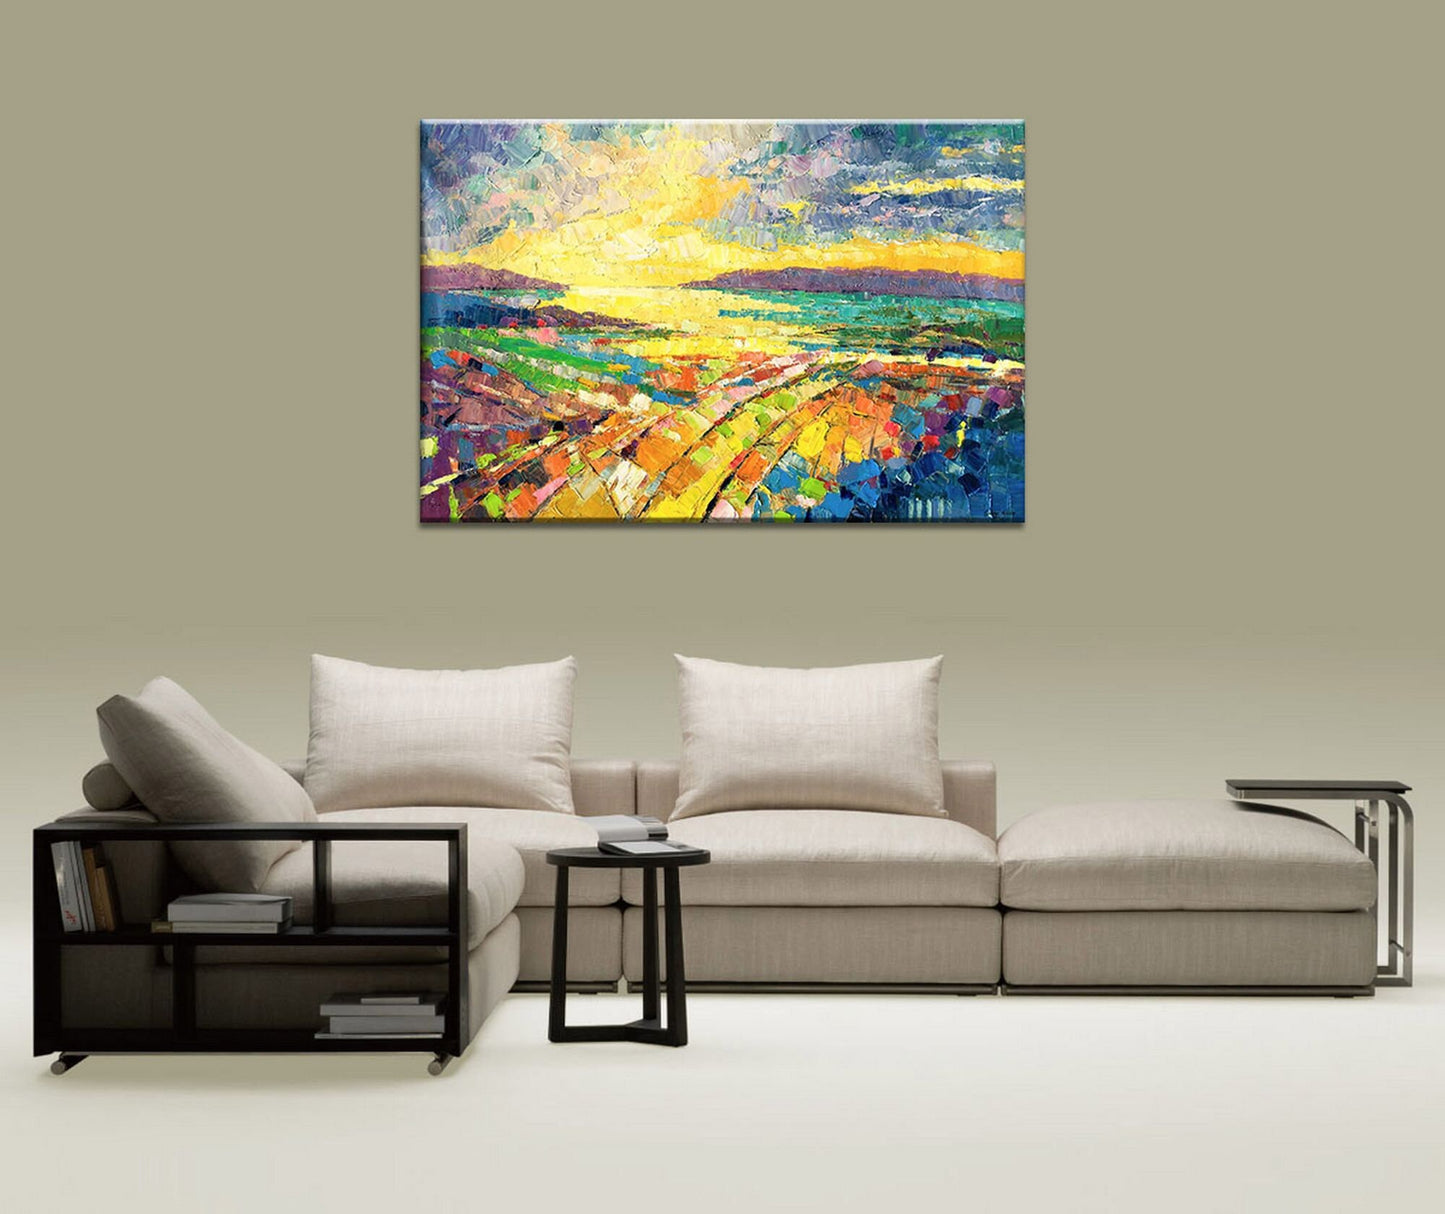 Large Abstract Landscape Painting, Oil Paintings, Abstract Canvas Painting, Living Room Wall Decor, Abstract Wall Art, Abstract Painting